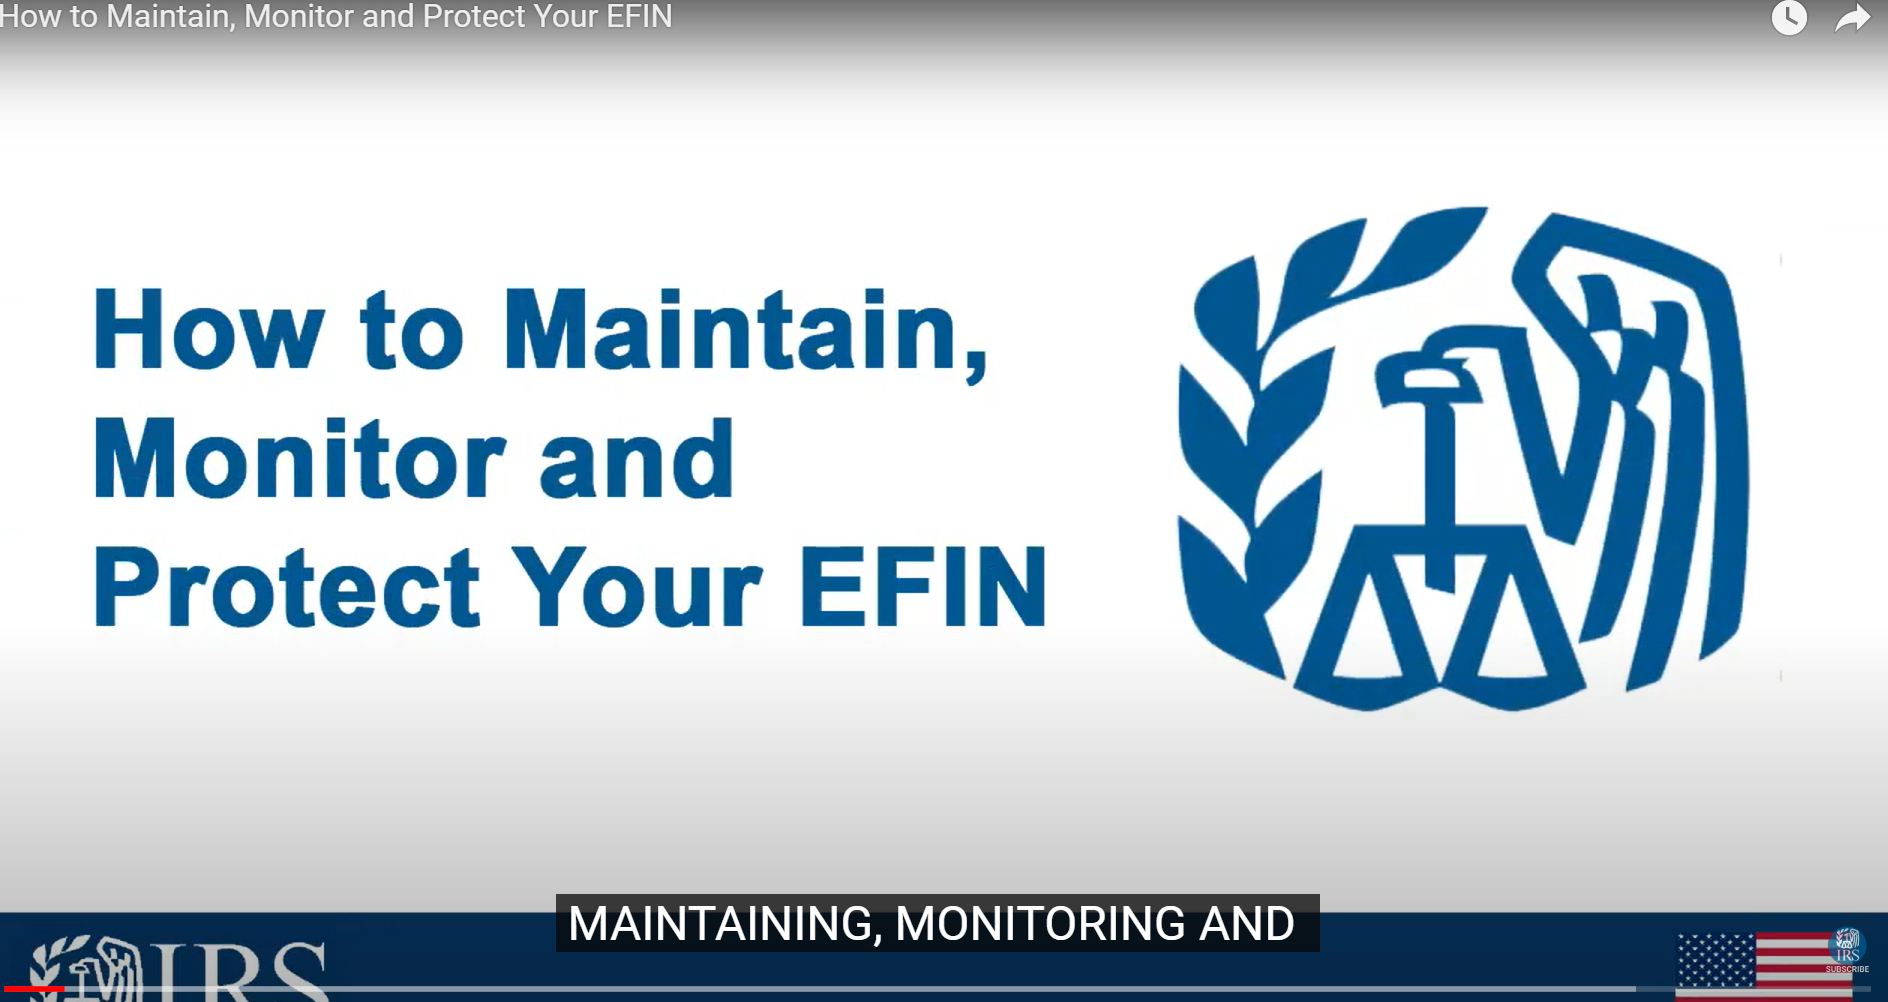 Find out how you can maintain, monitor and protect your electronic filing identification number (EFIN)